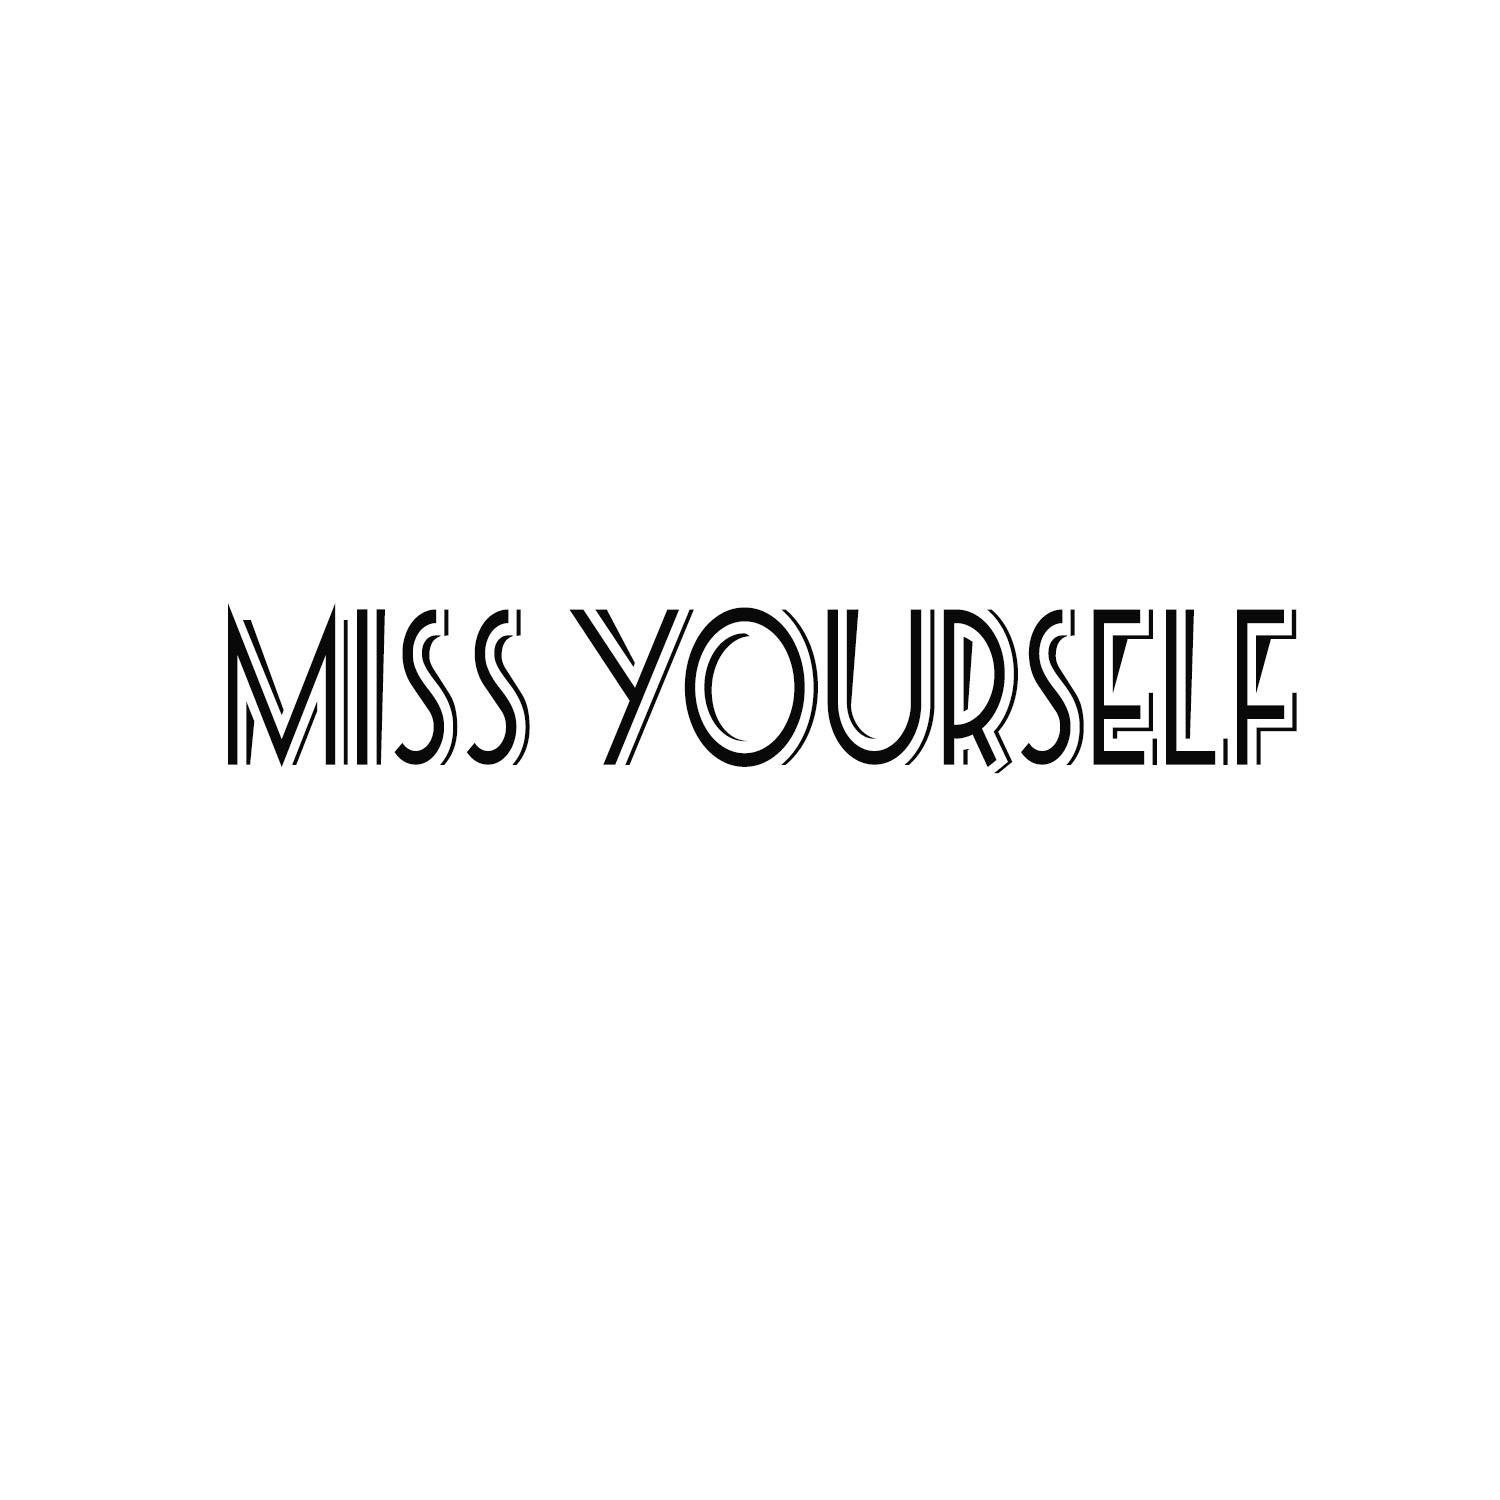 MISS YOURSELF